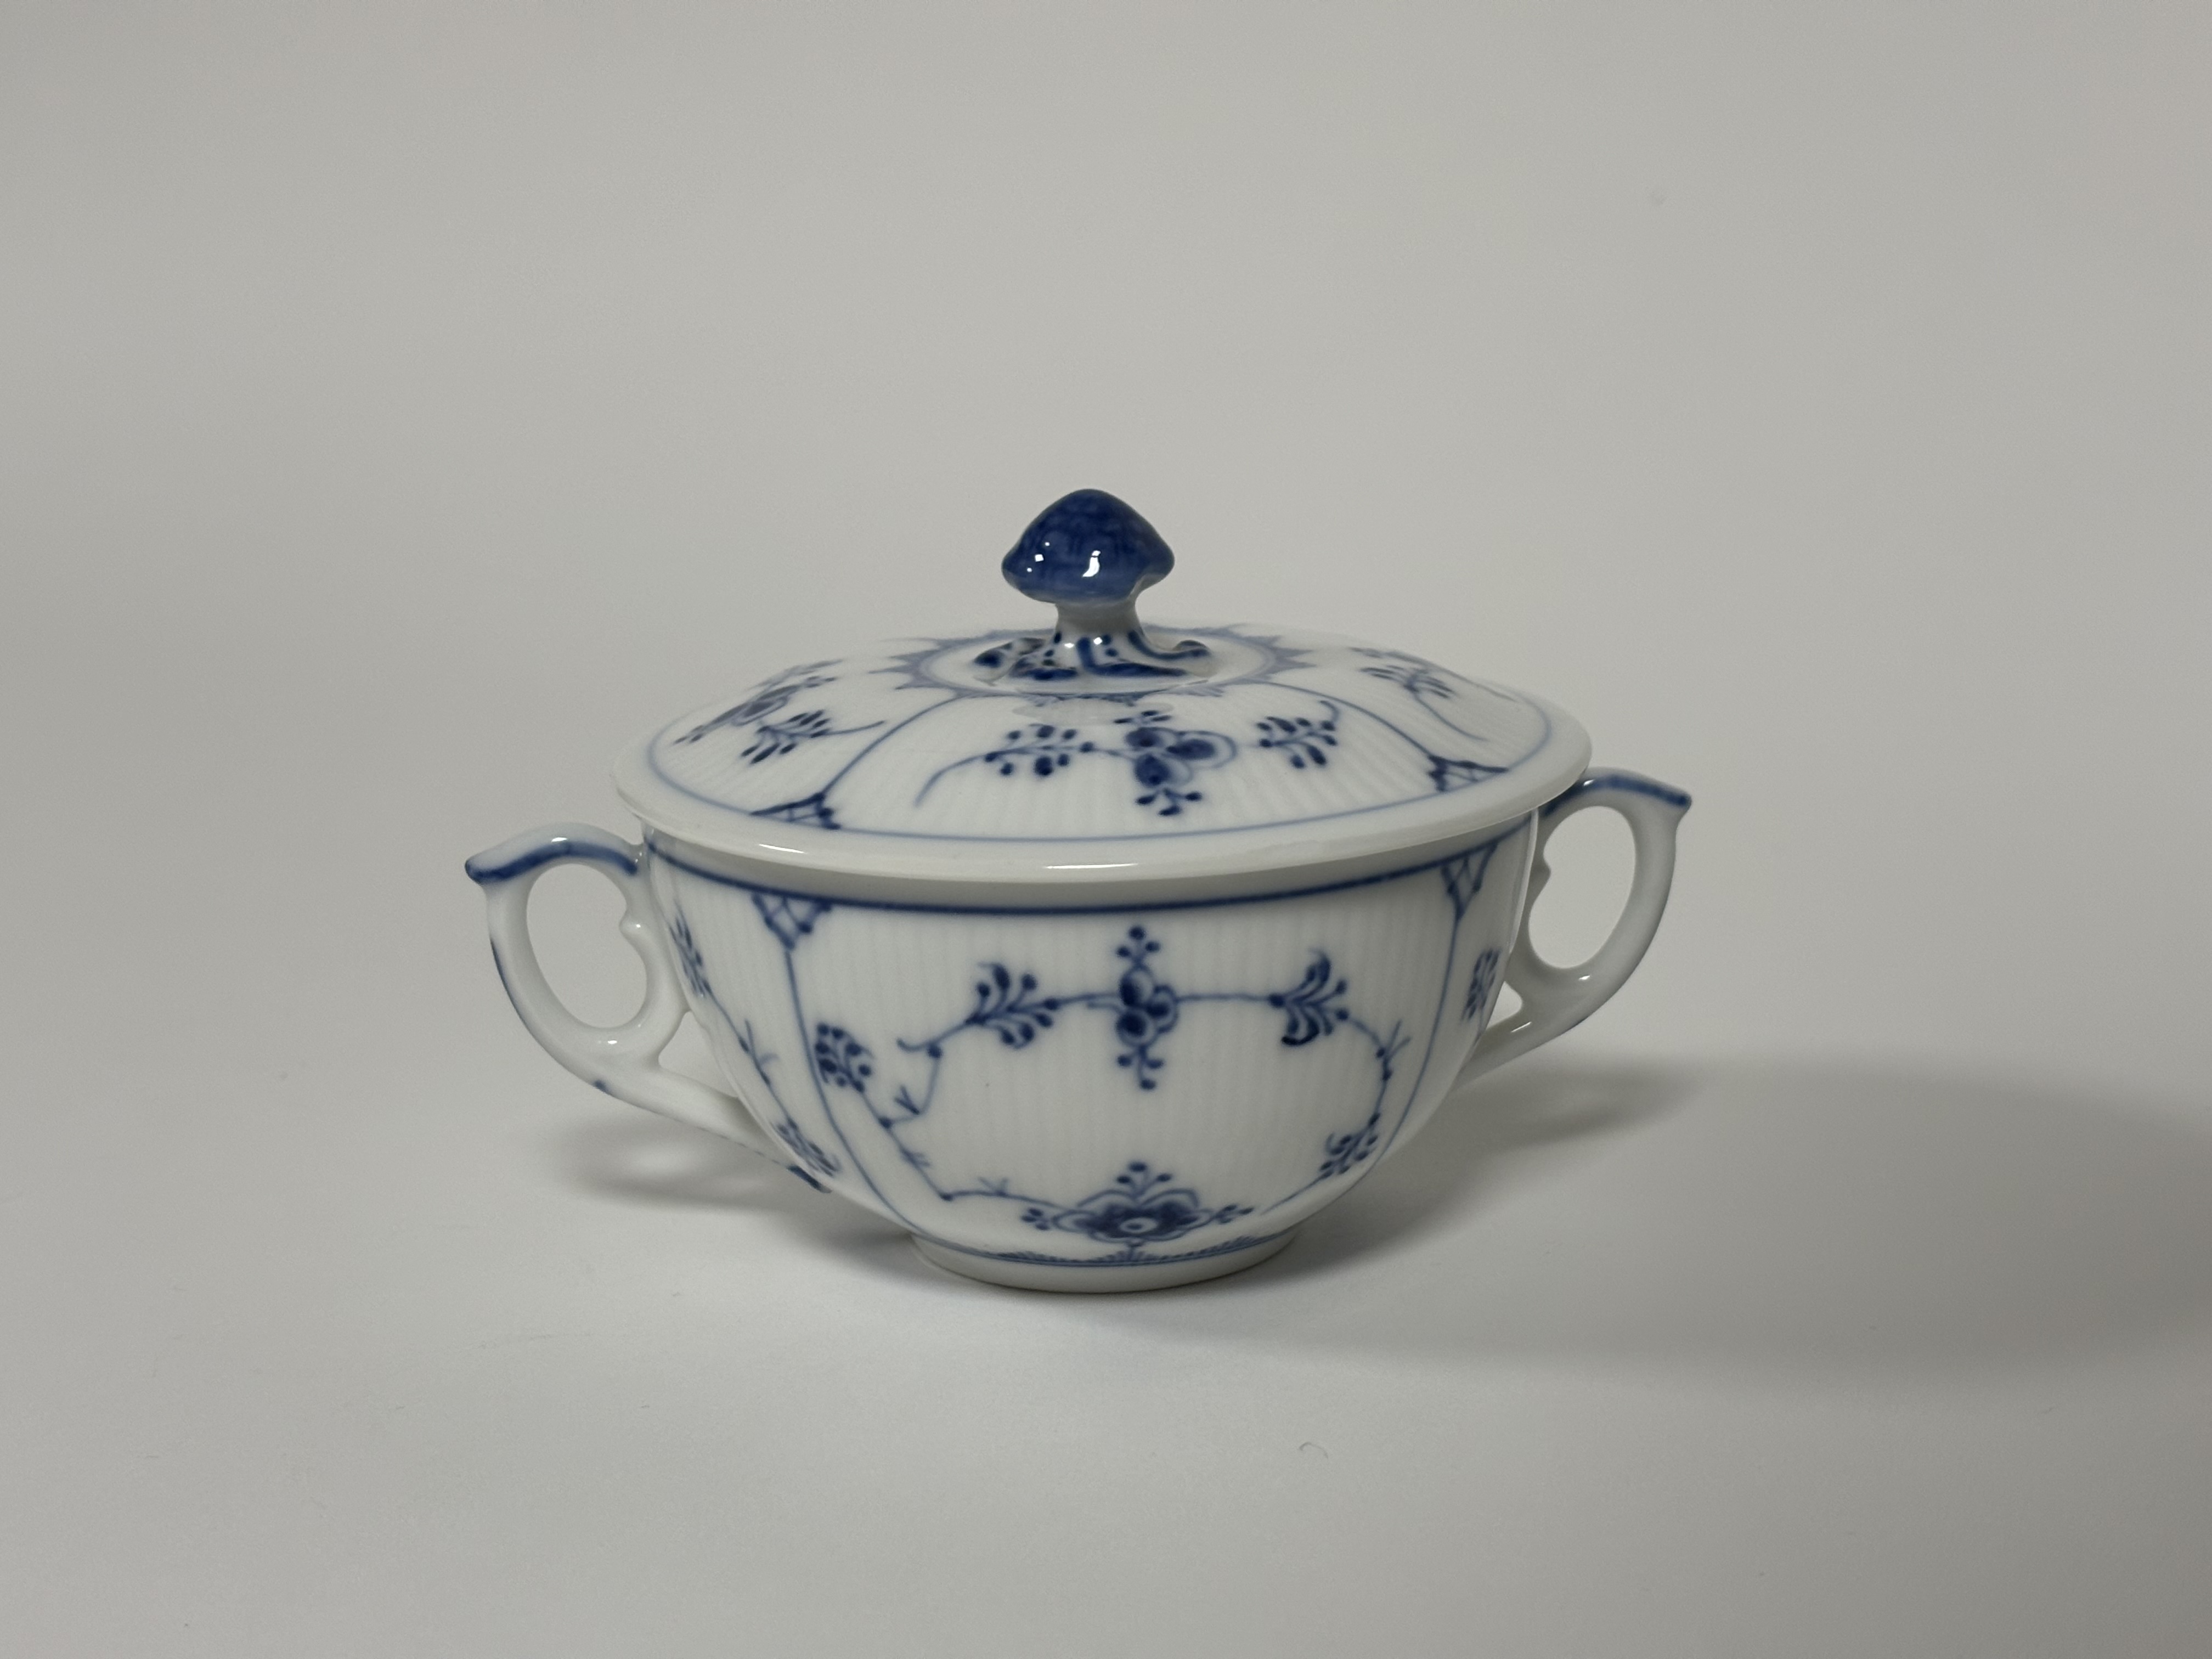 A set of six Royal Copenhagen soup cups and covers in the plain fluted blue pattern (Musselmalet), - Image 6 of 8